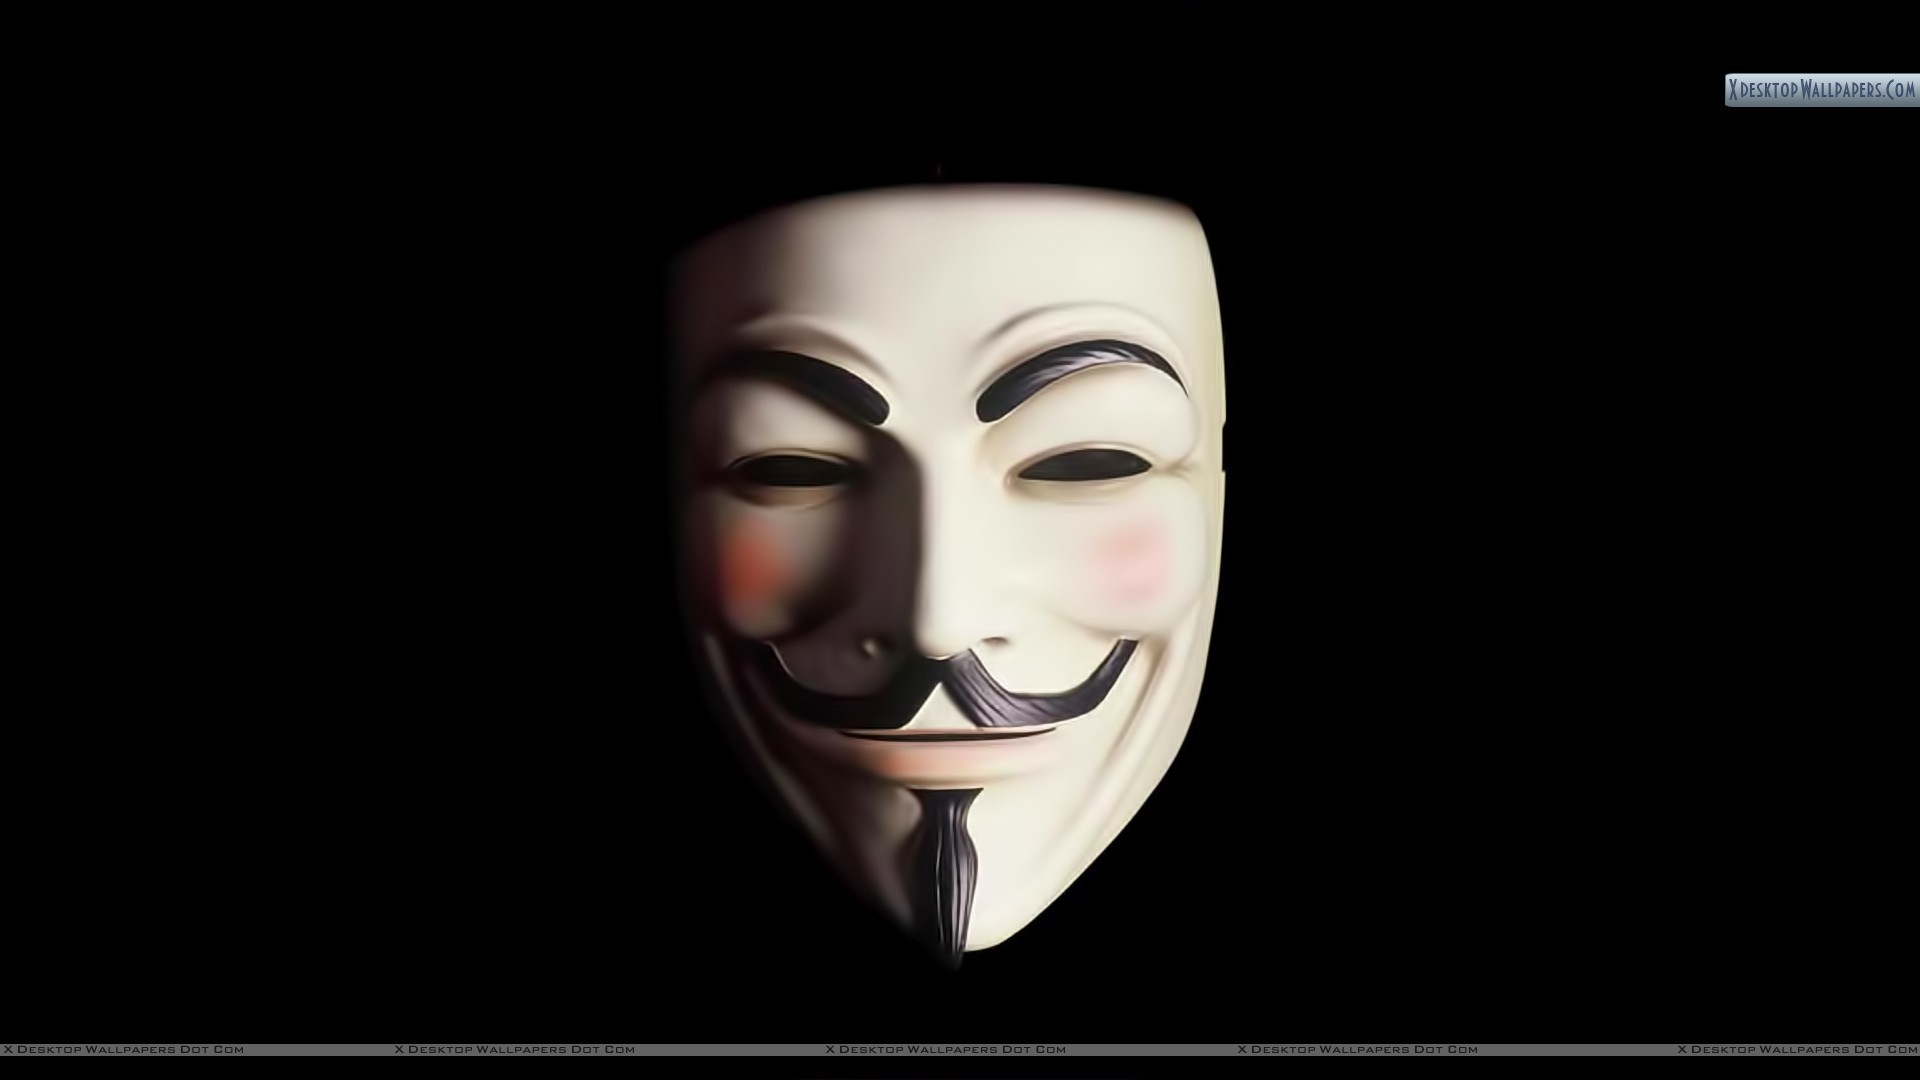 1920x1080 hd-wallpapers-guy-fawkes-mask-on-black-background .